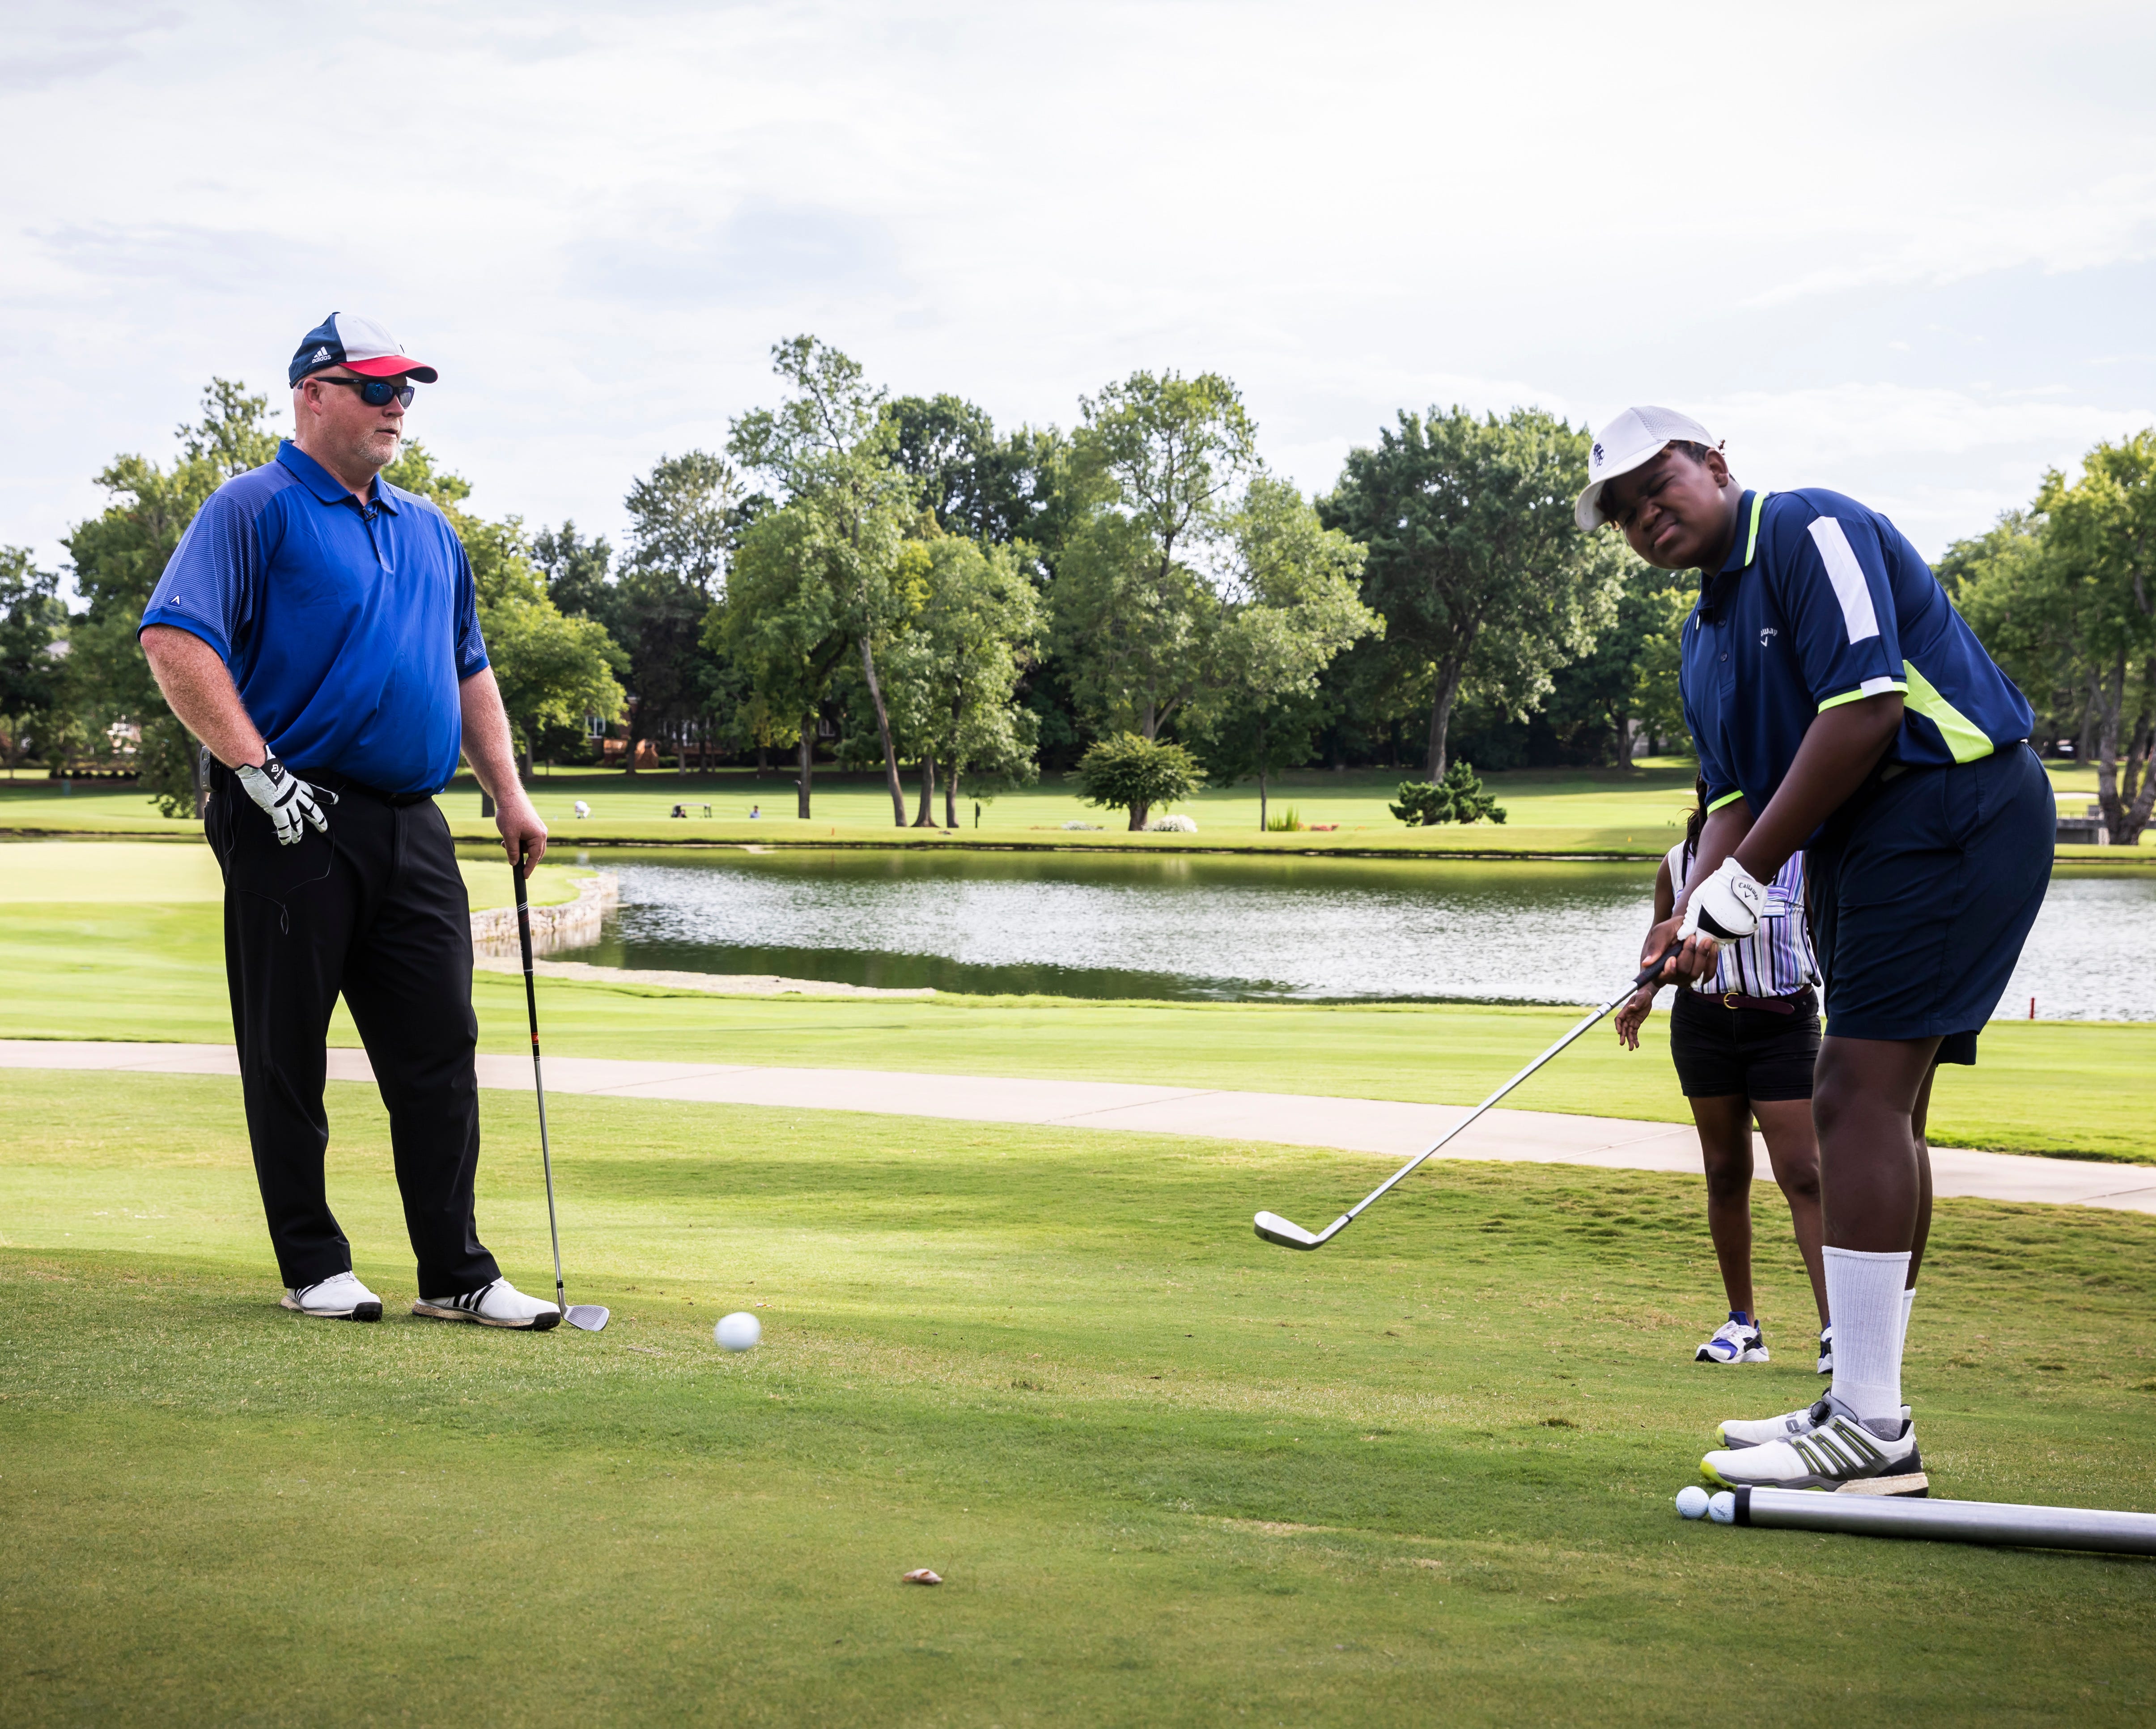 Three-time national champion blind golfer Chad NeSmith, left, teaches Malachi Johnson, who has lost the ability to see, to play the sport Saturday, July 10, 2021 at the Brentwood Country Club.